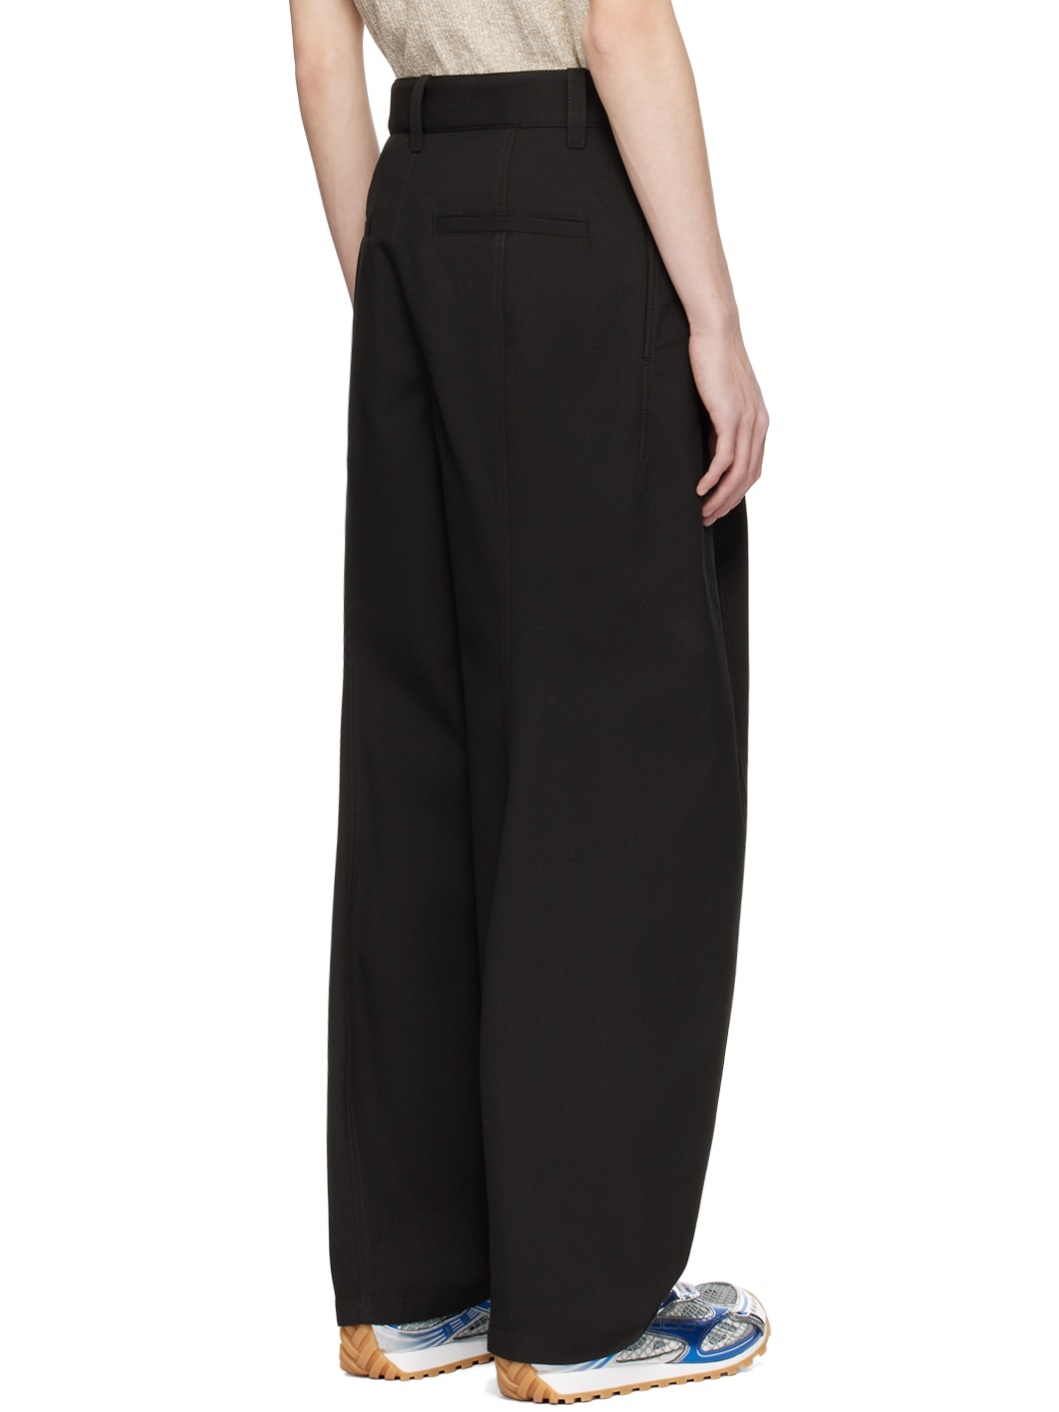 Black Pleated Trousers - 3